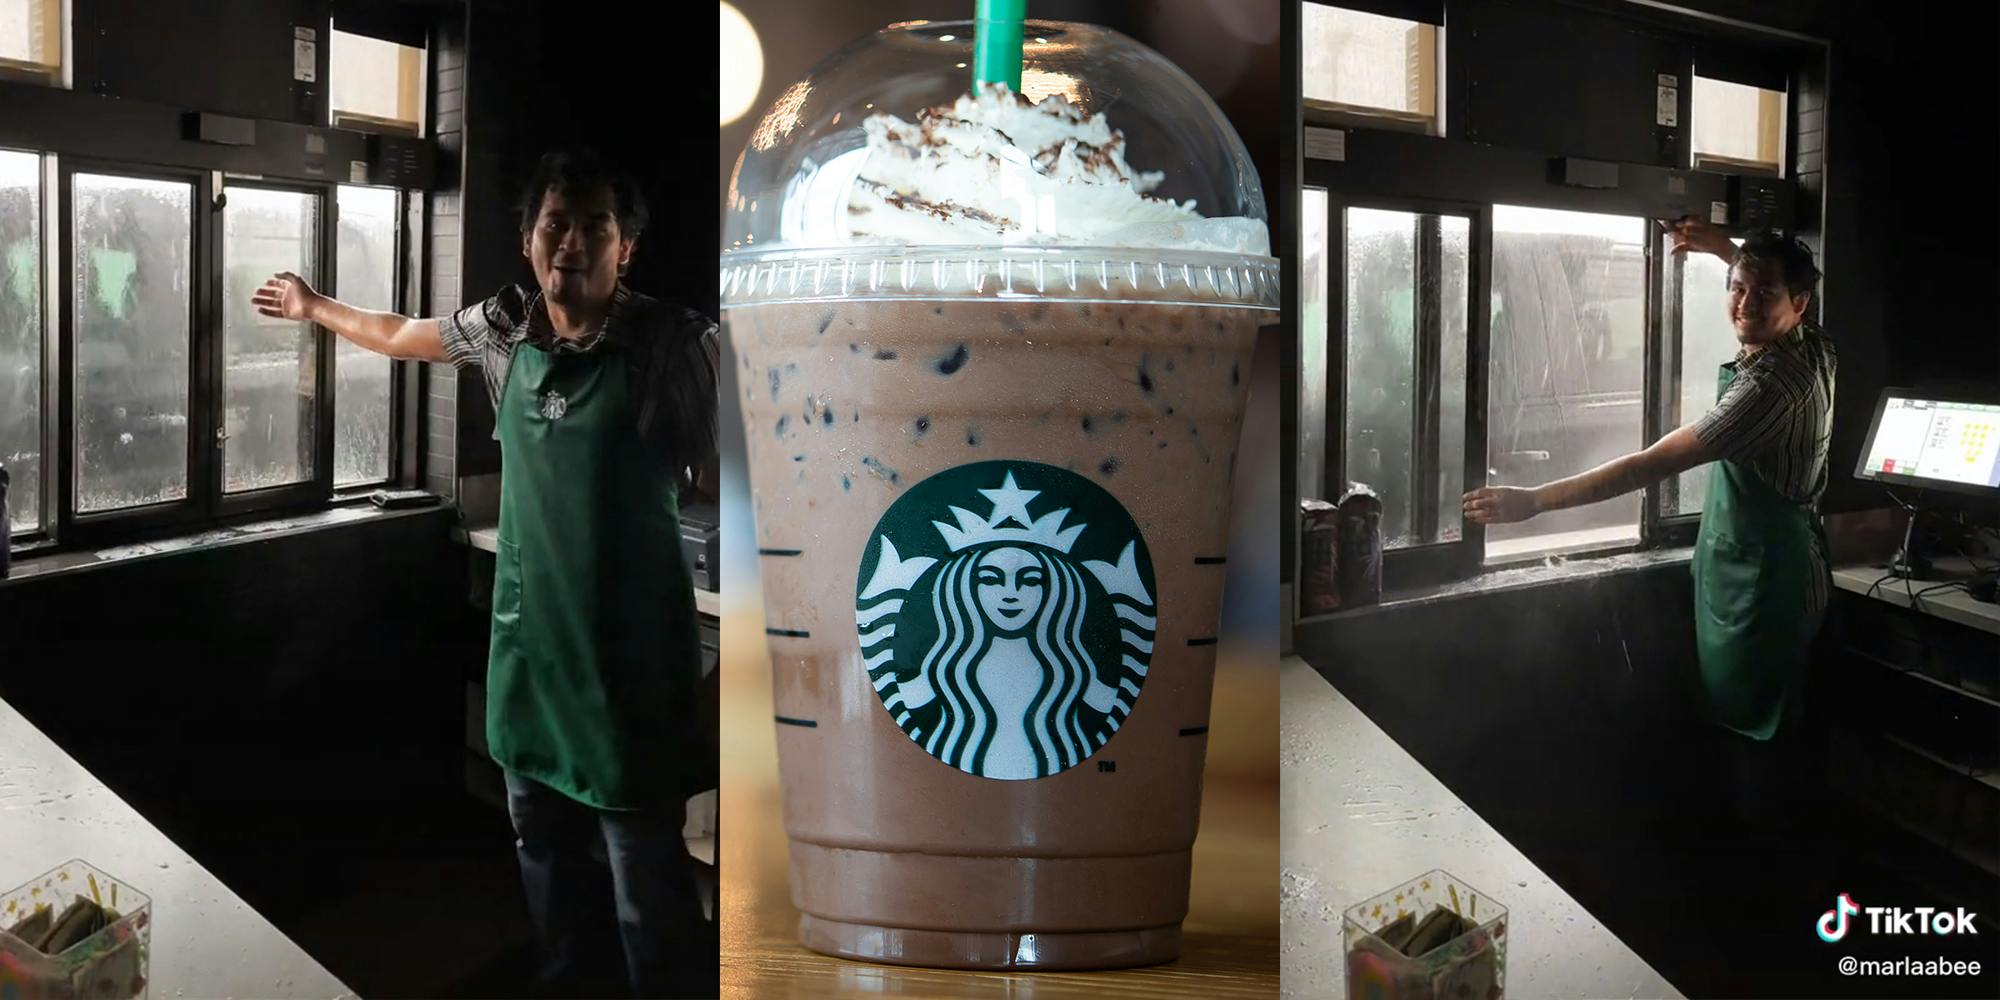 ‘When there’s a flash flood warning + hail but customers still need their coffee’: Starbucks baristas continue to work in drive-thru during storm, sparking debate